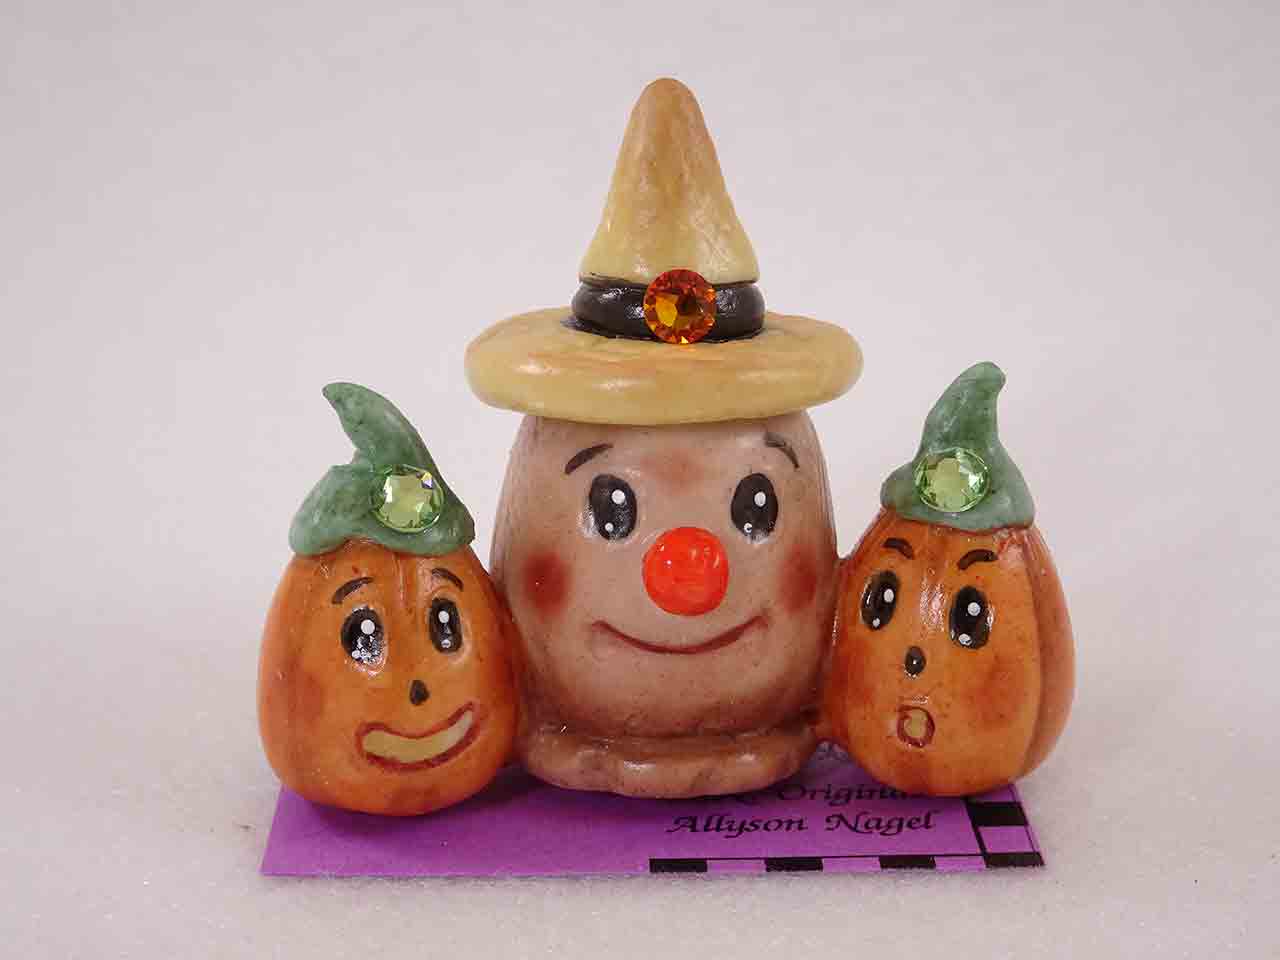 Allyson Nagel miniature one piece holiday salt and pepper shakers - Halloween scarecrow and pumpkins